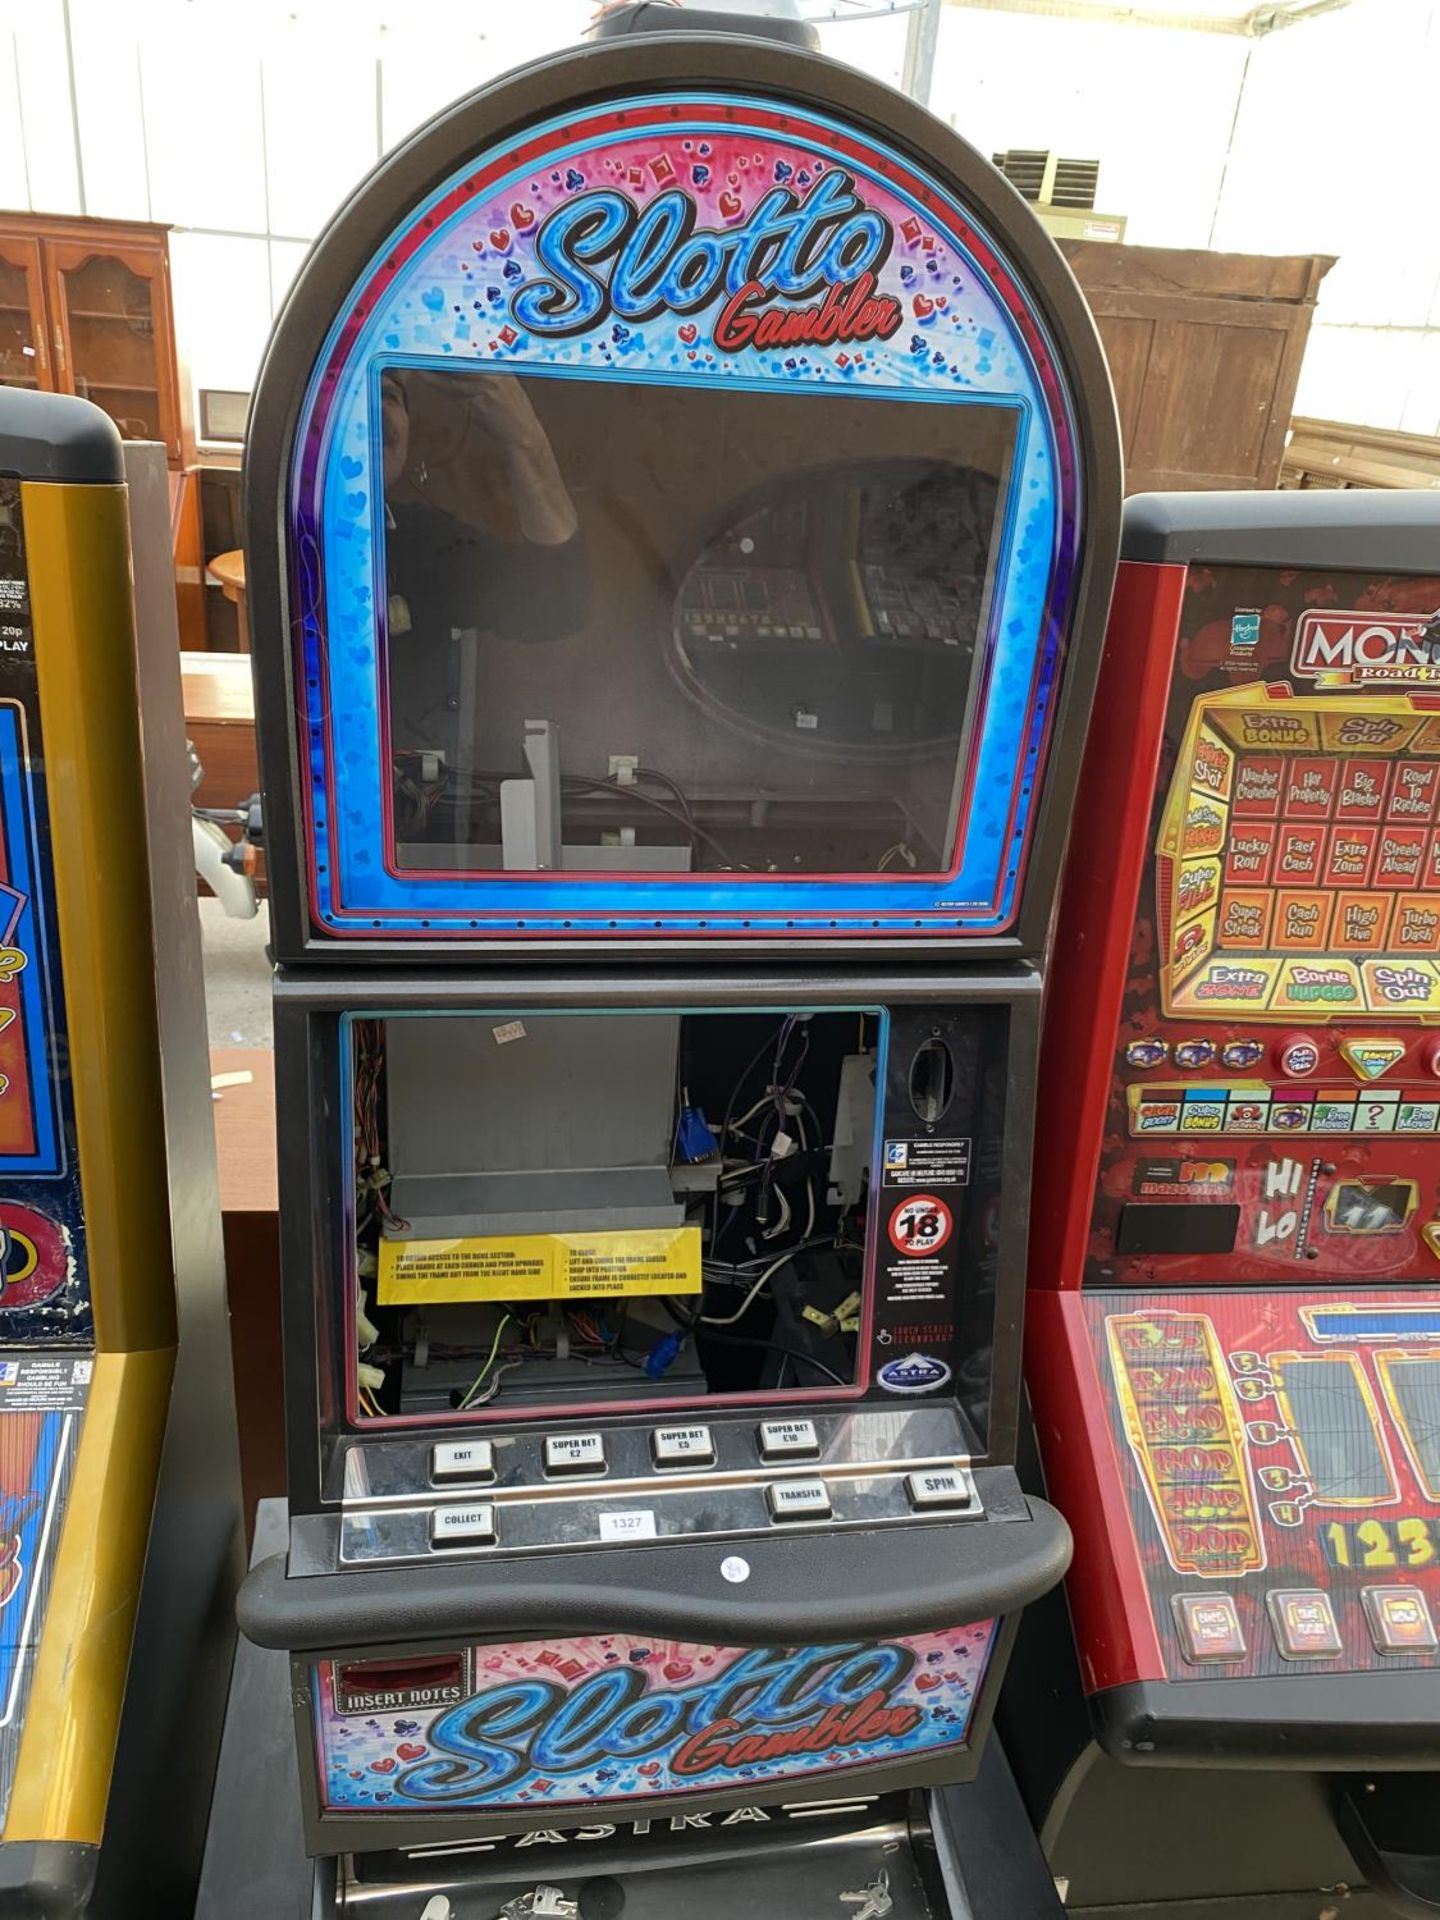 A SLOTTO GAMBLER GAMES MACHINE FOR SOPARES OR REPAIRS BUT WITH KEY - Image 2 of 3